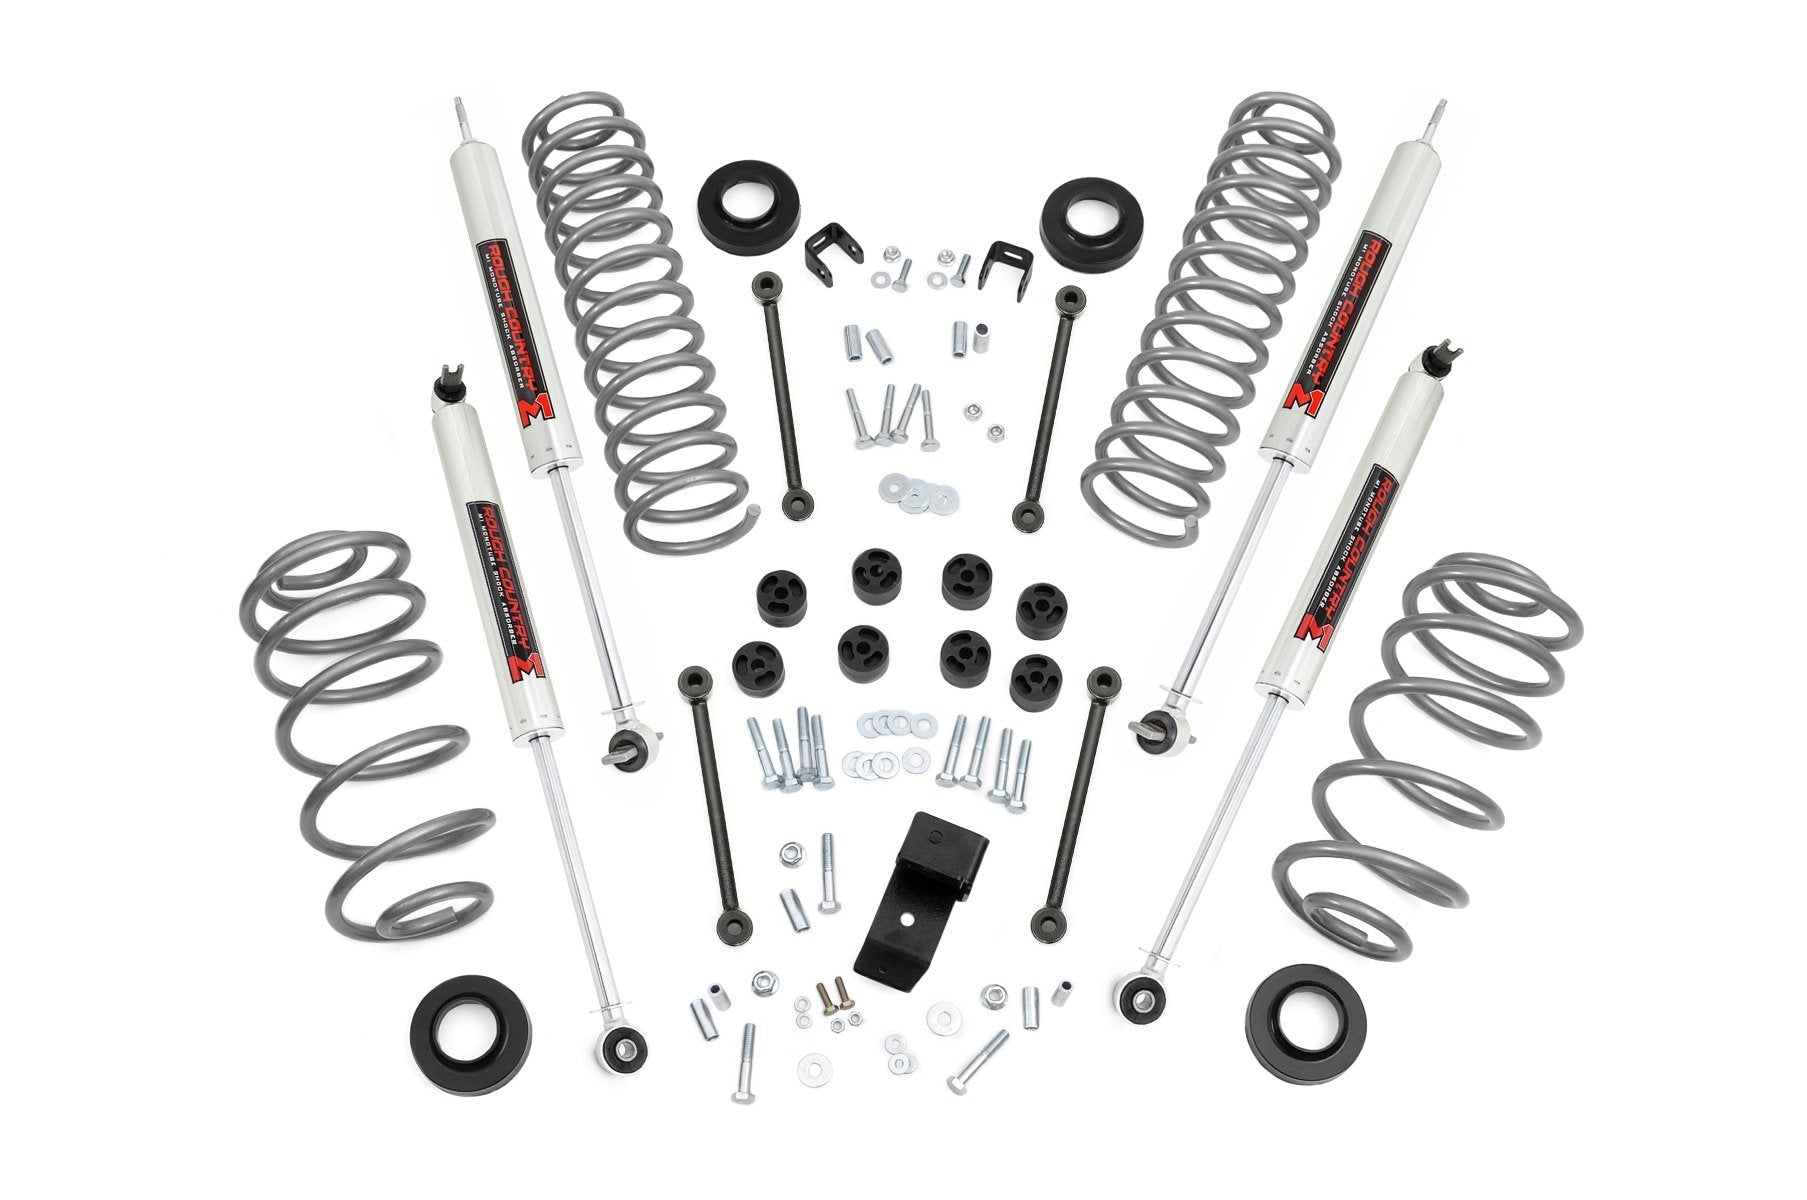 Rough Country 3.25 Inch Lift Kit | 6 Cyl | M1 | Jeep Wrangler TJ 4WD (1997-2002)